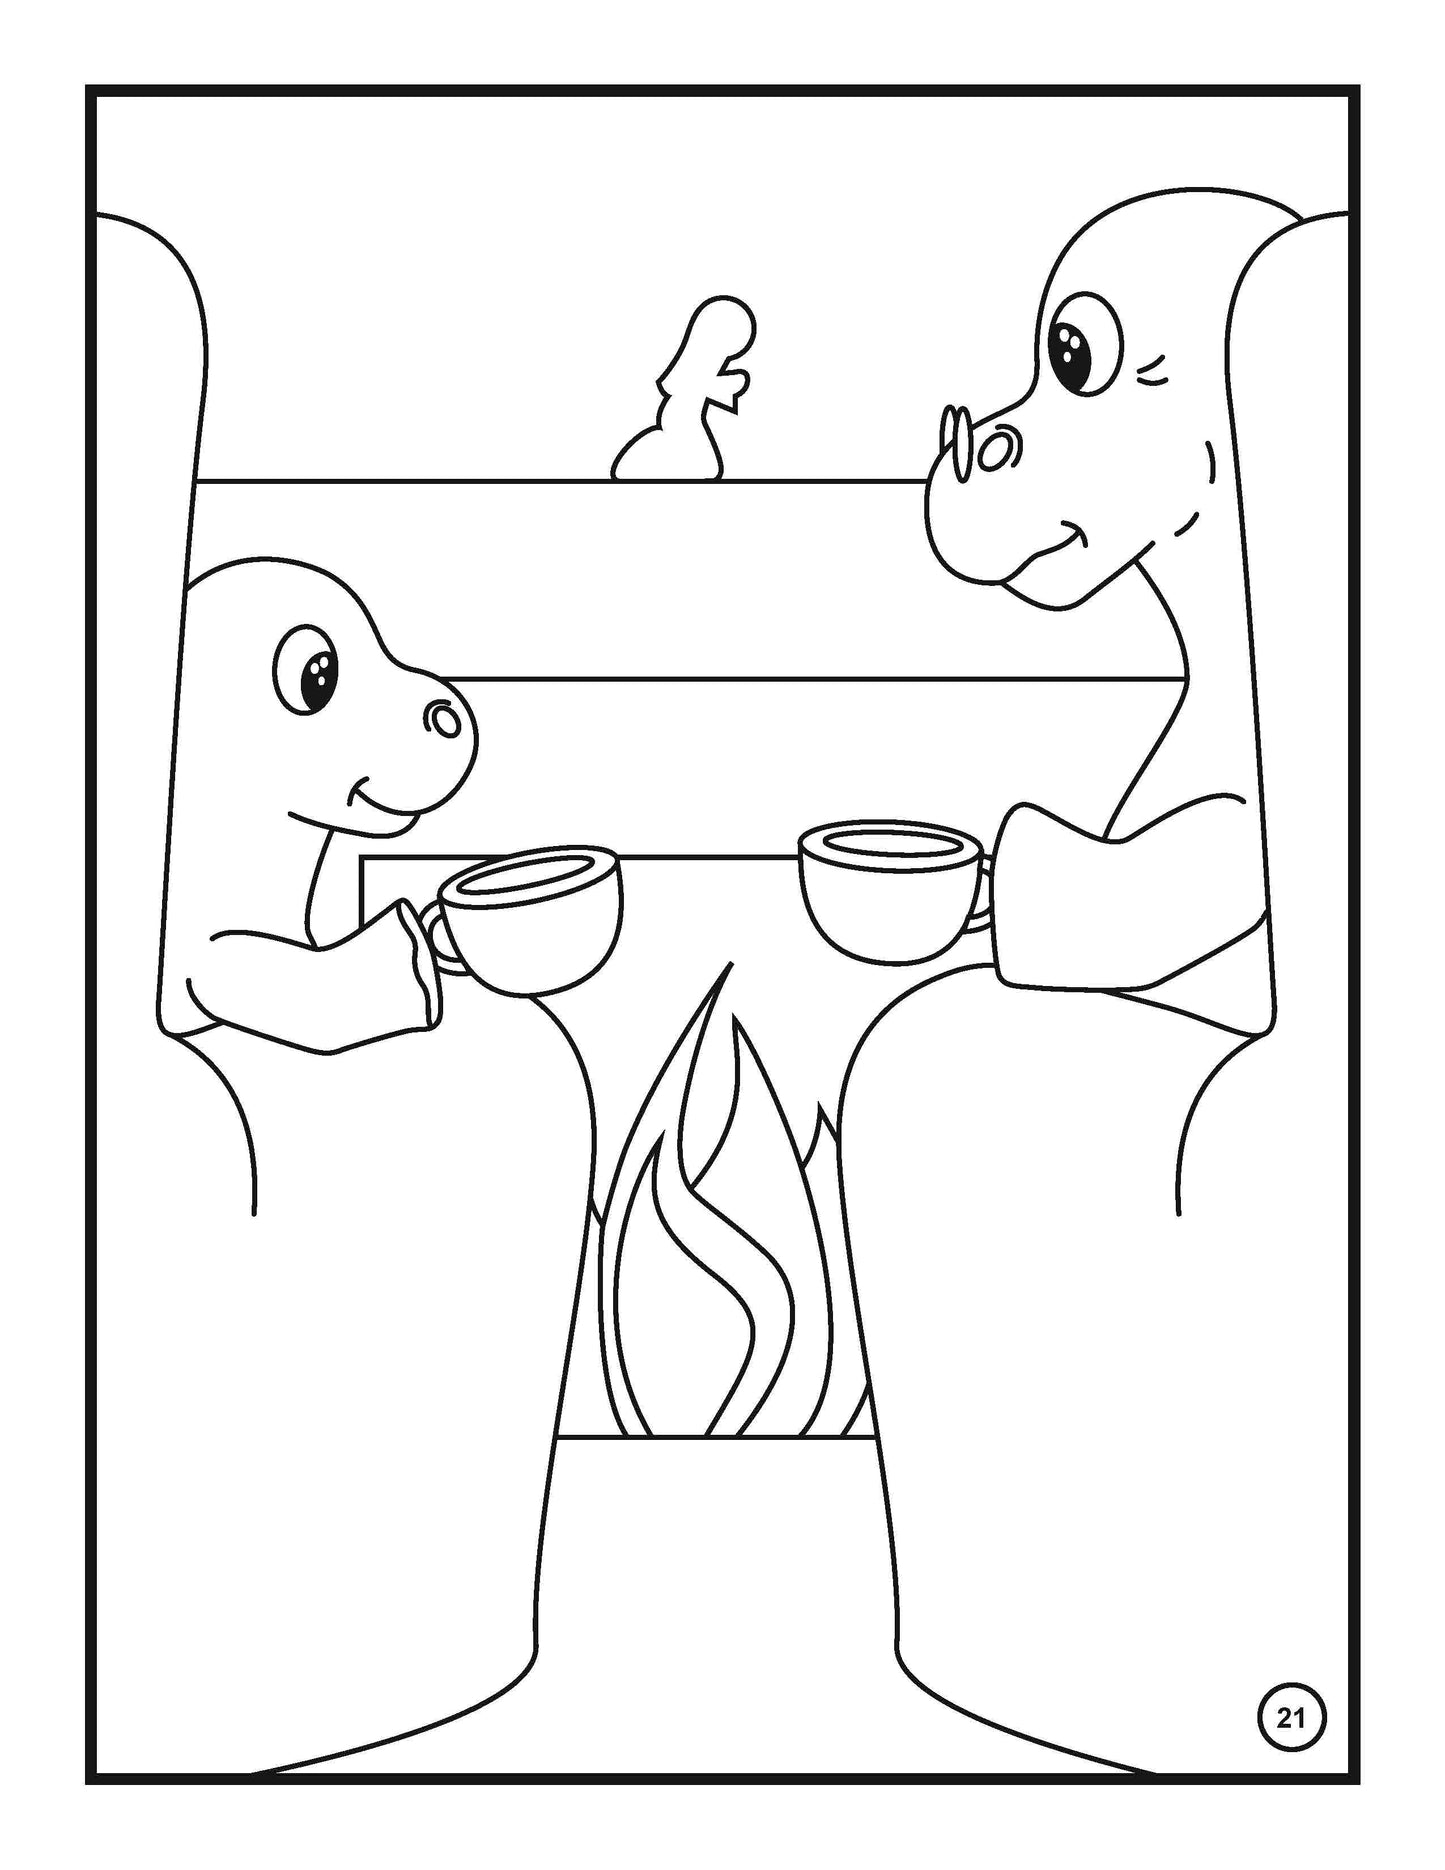 Black and white coloring page featuring two cartoon dinosaurs sitting opposite each other with mugs in their hands, appearing to be having a conversation. They are comfortably ensconced in large armchairs beside a crackling fire. The cozy scene suggests a warm, indoor setting.